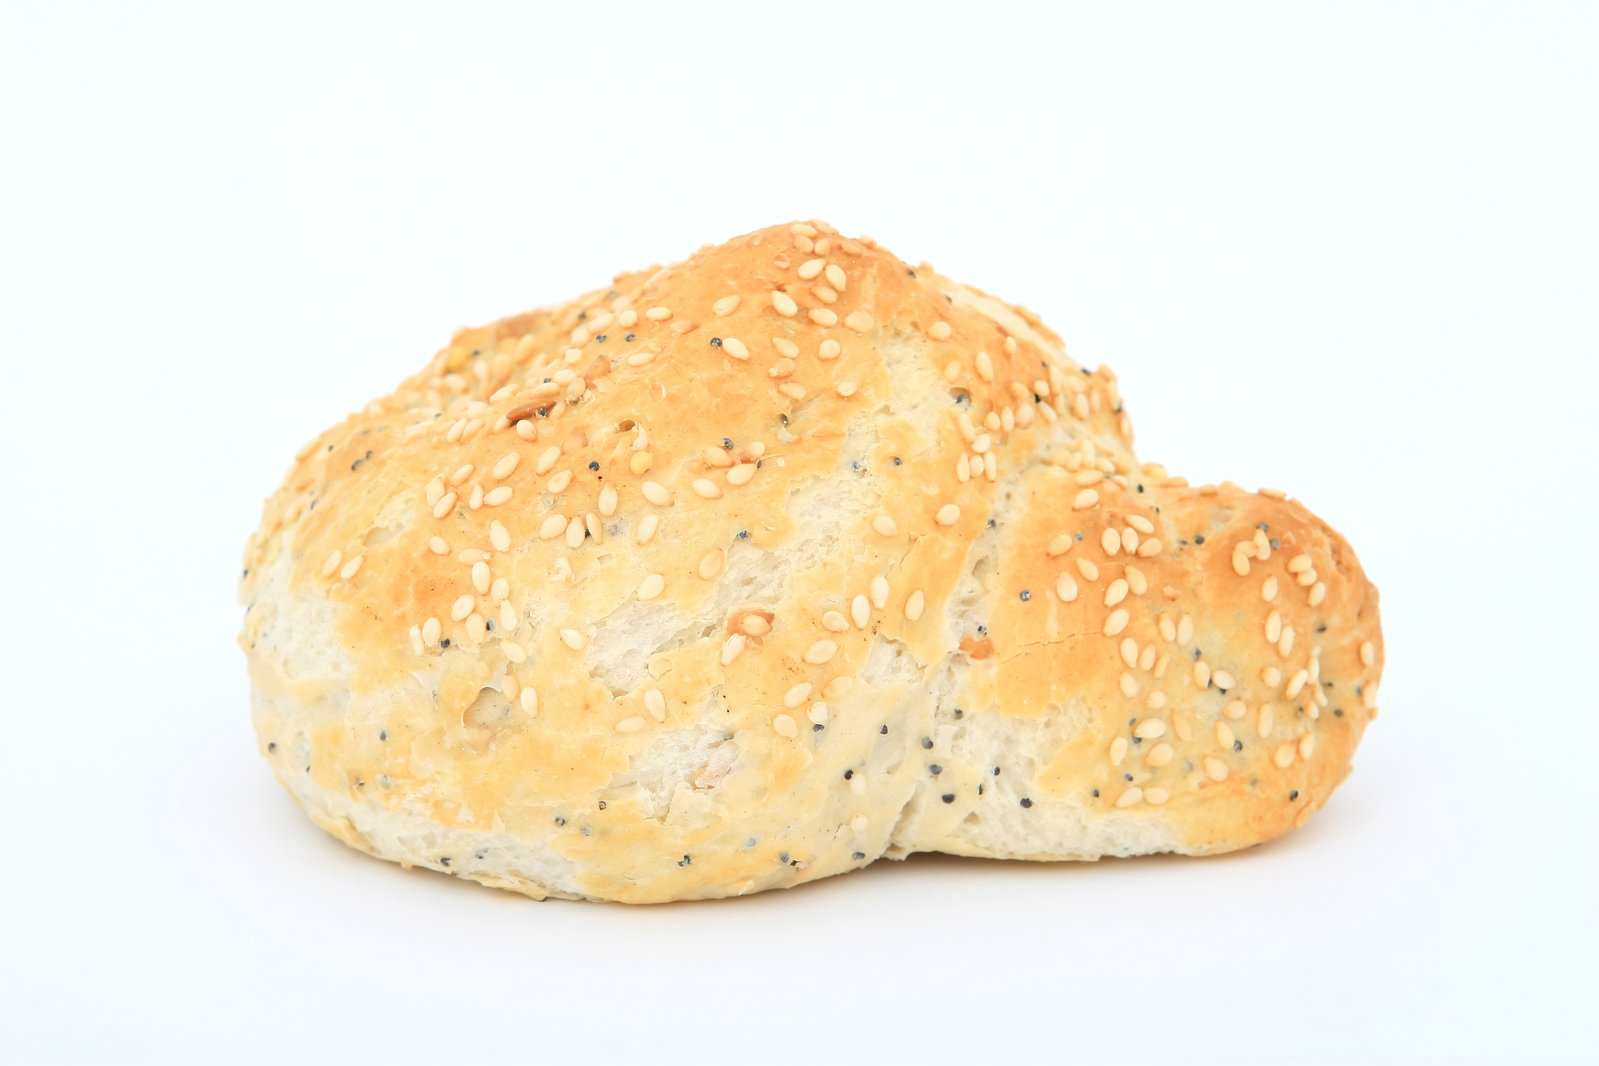 two sesame seed buns laying side by side on top of each other